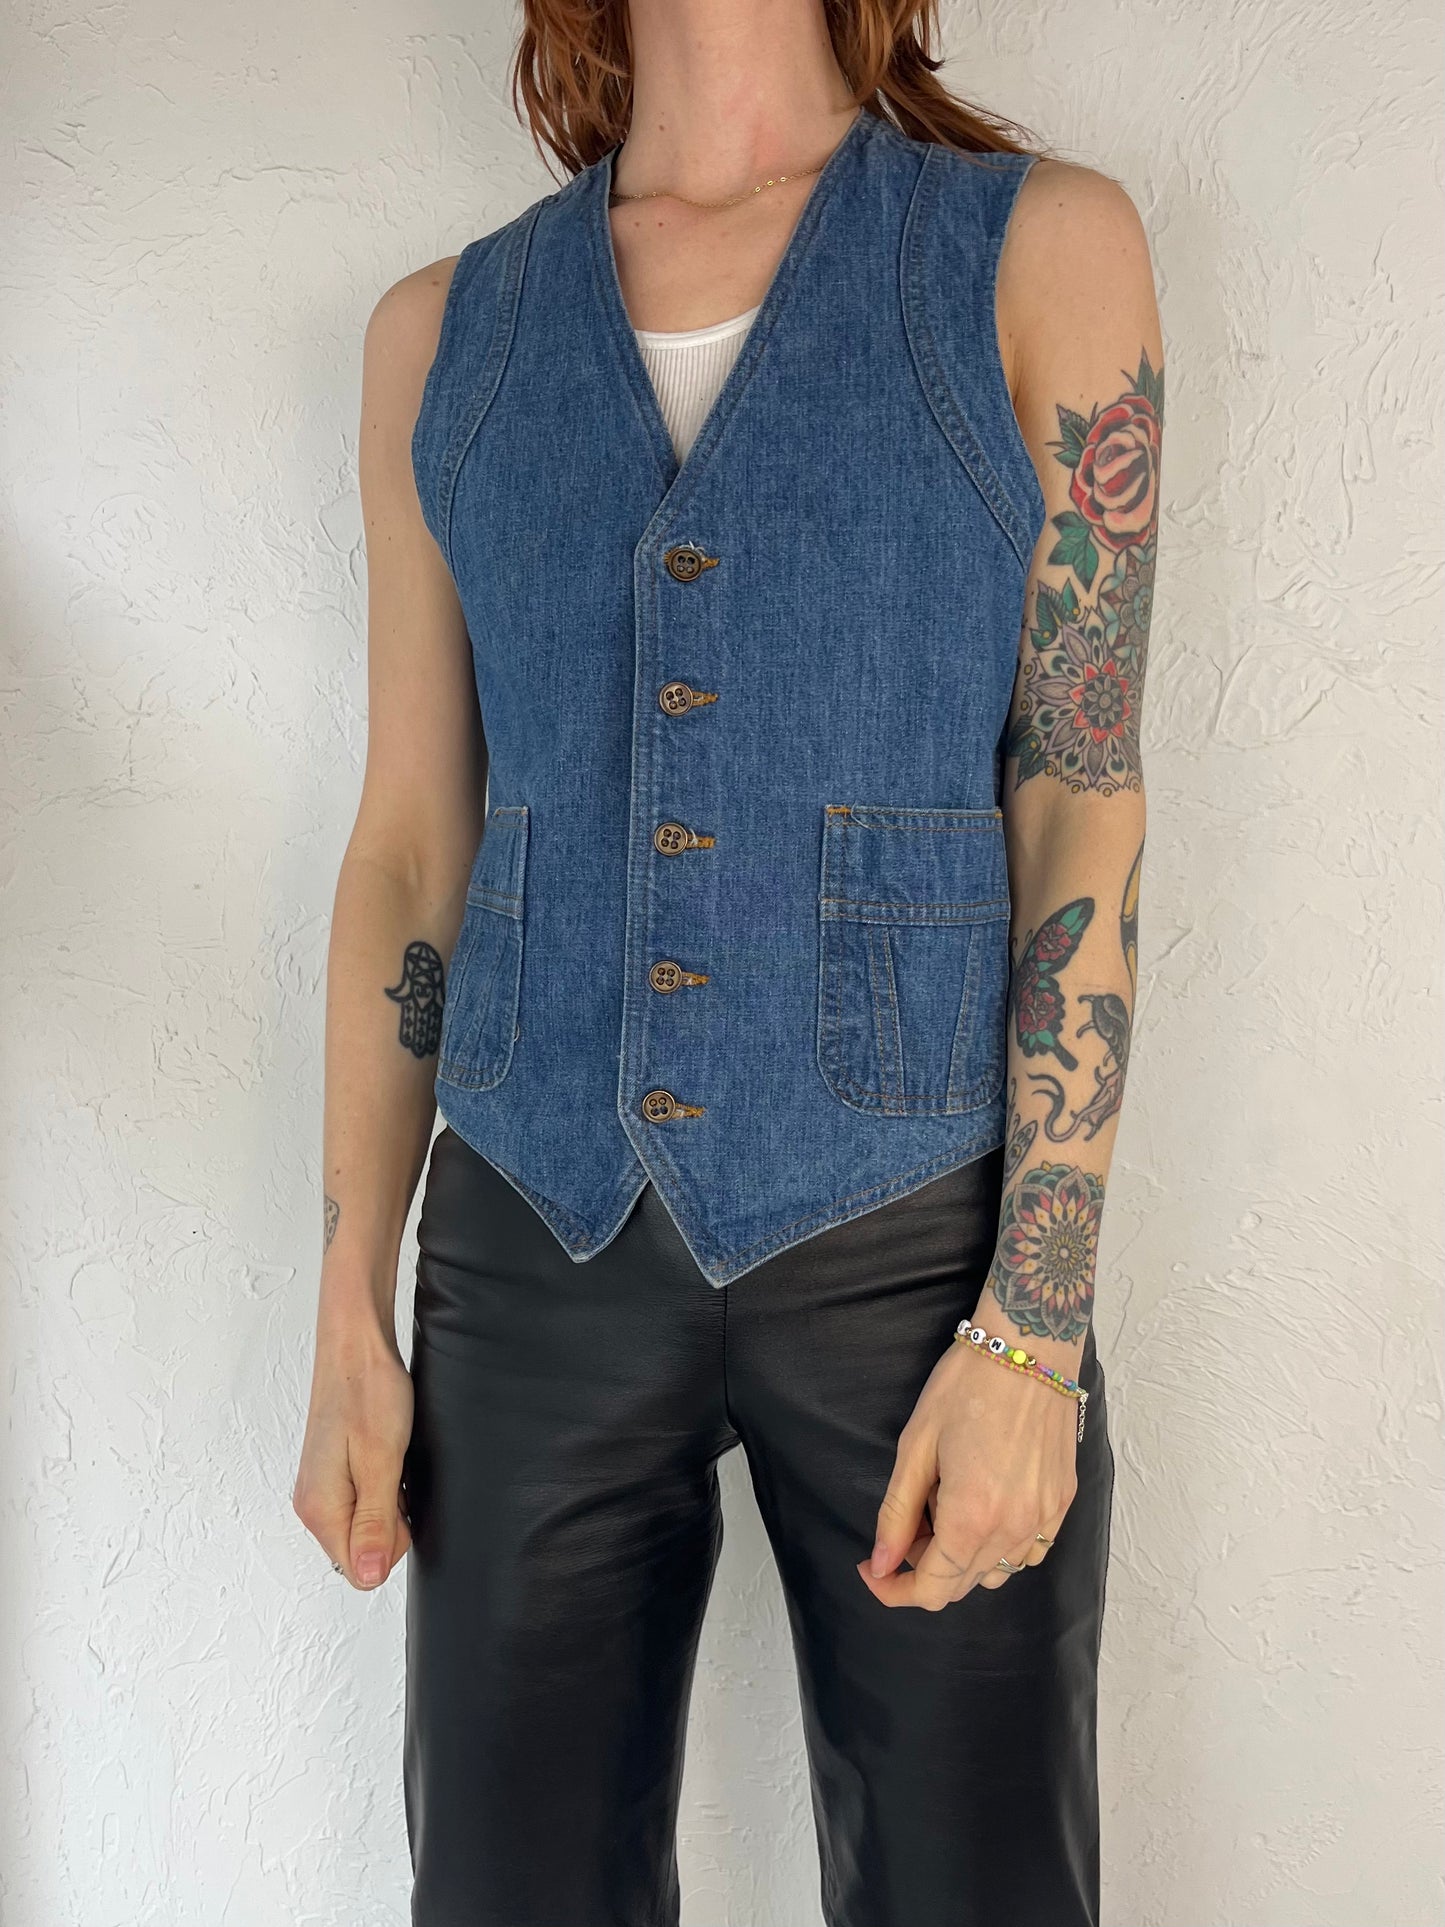 80s 'Lee' Denim Fitted Vest / Small